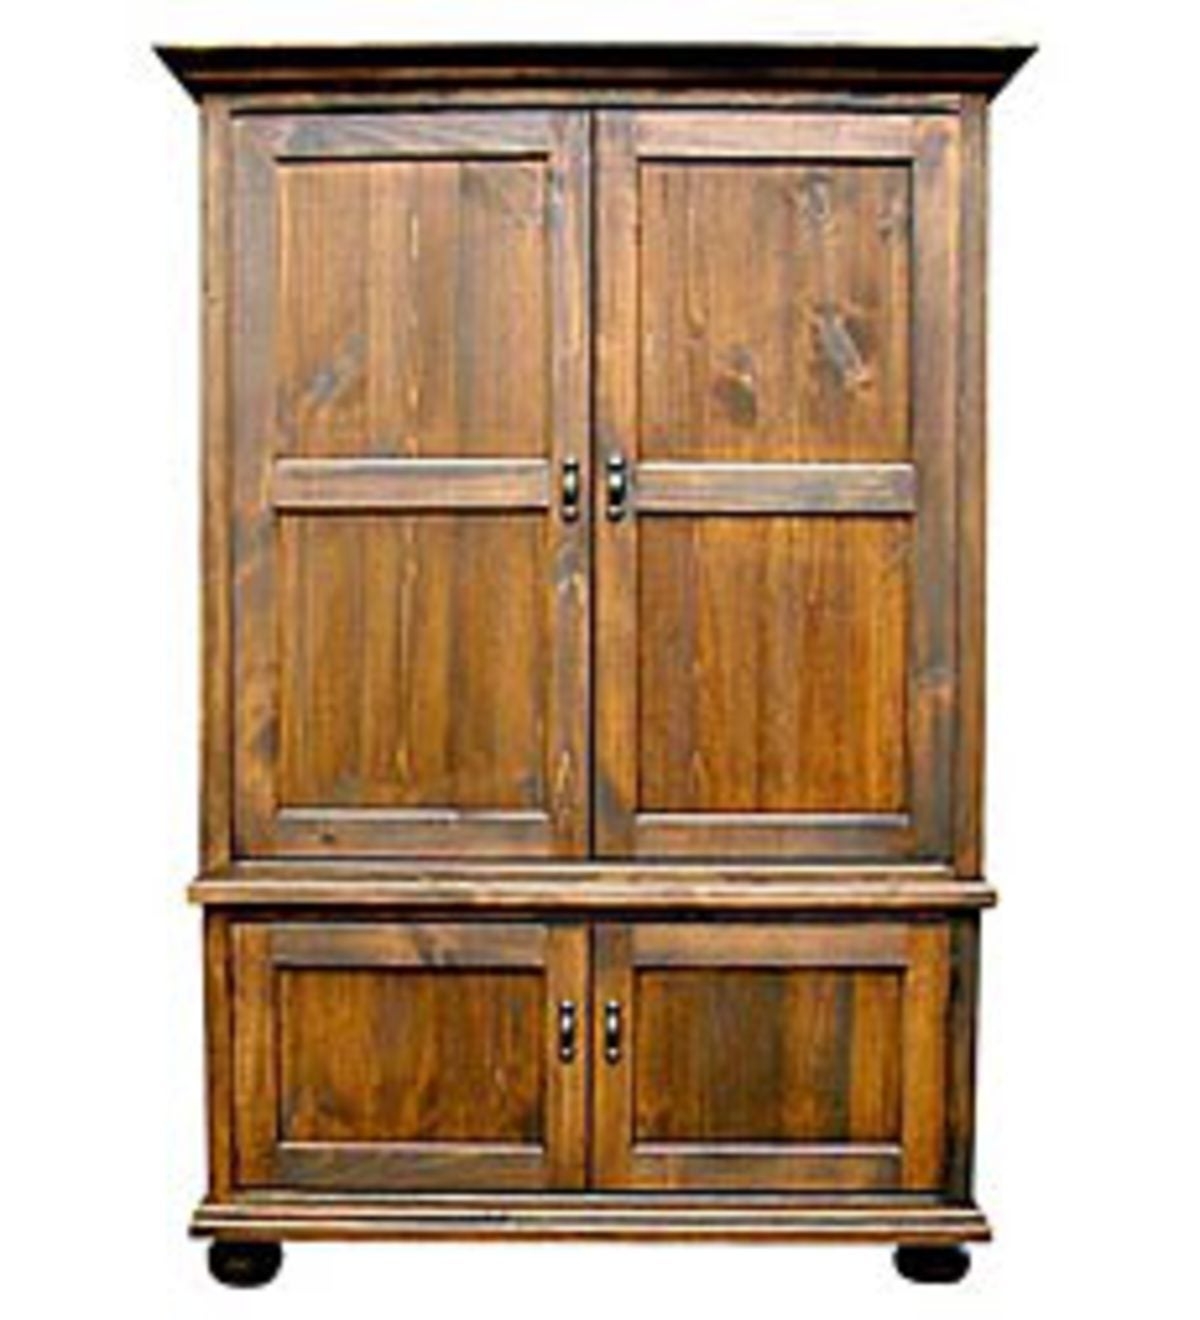 Television armoire pocket doors